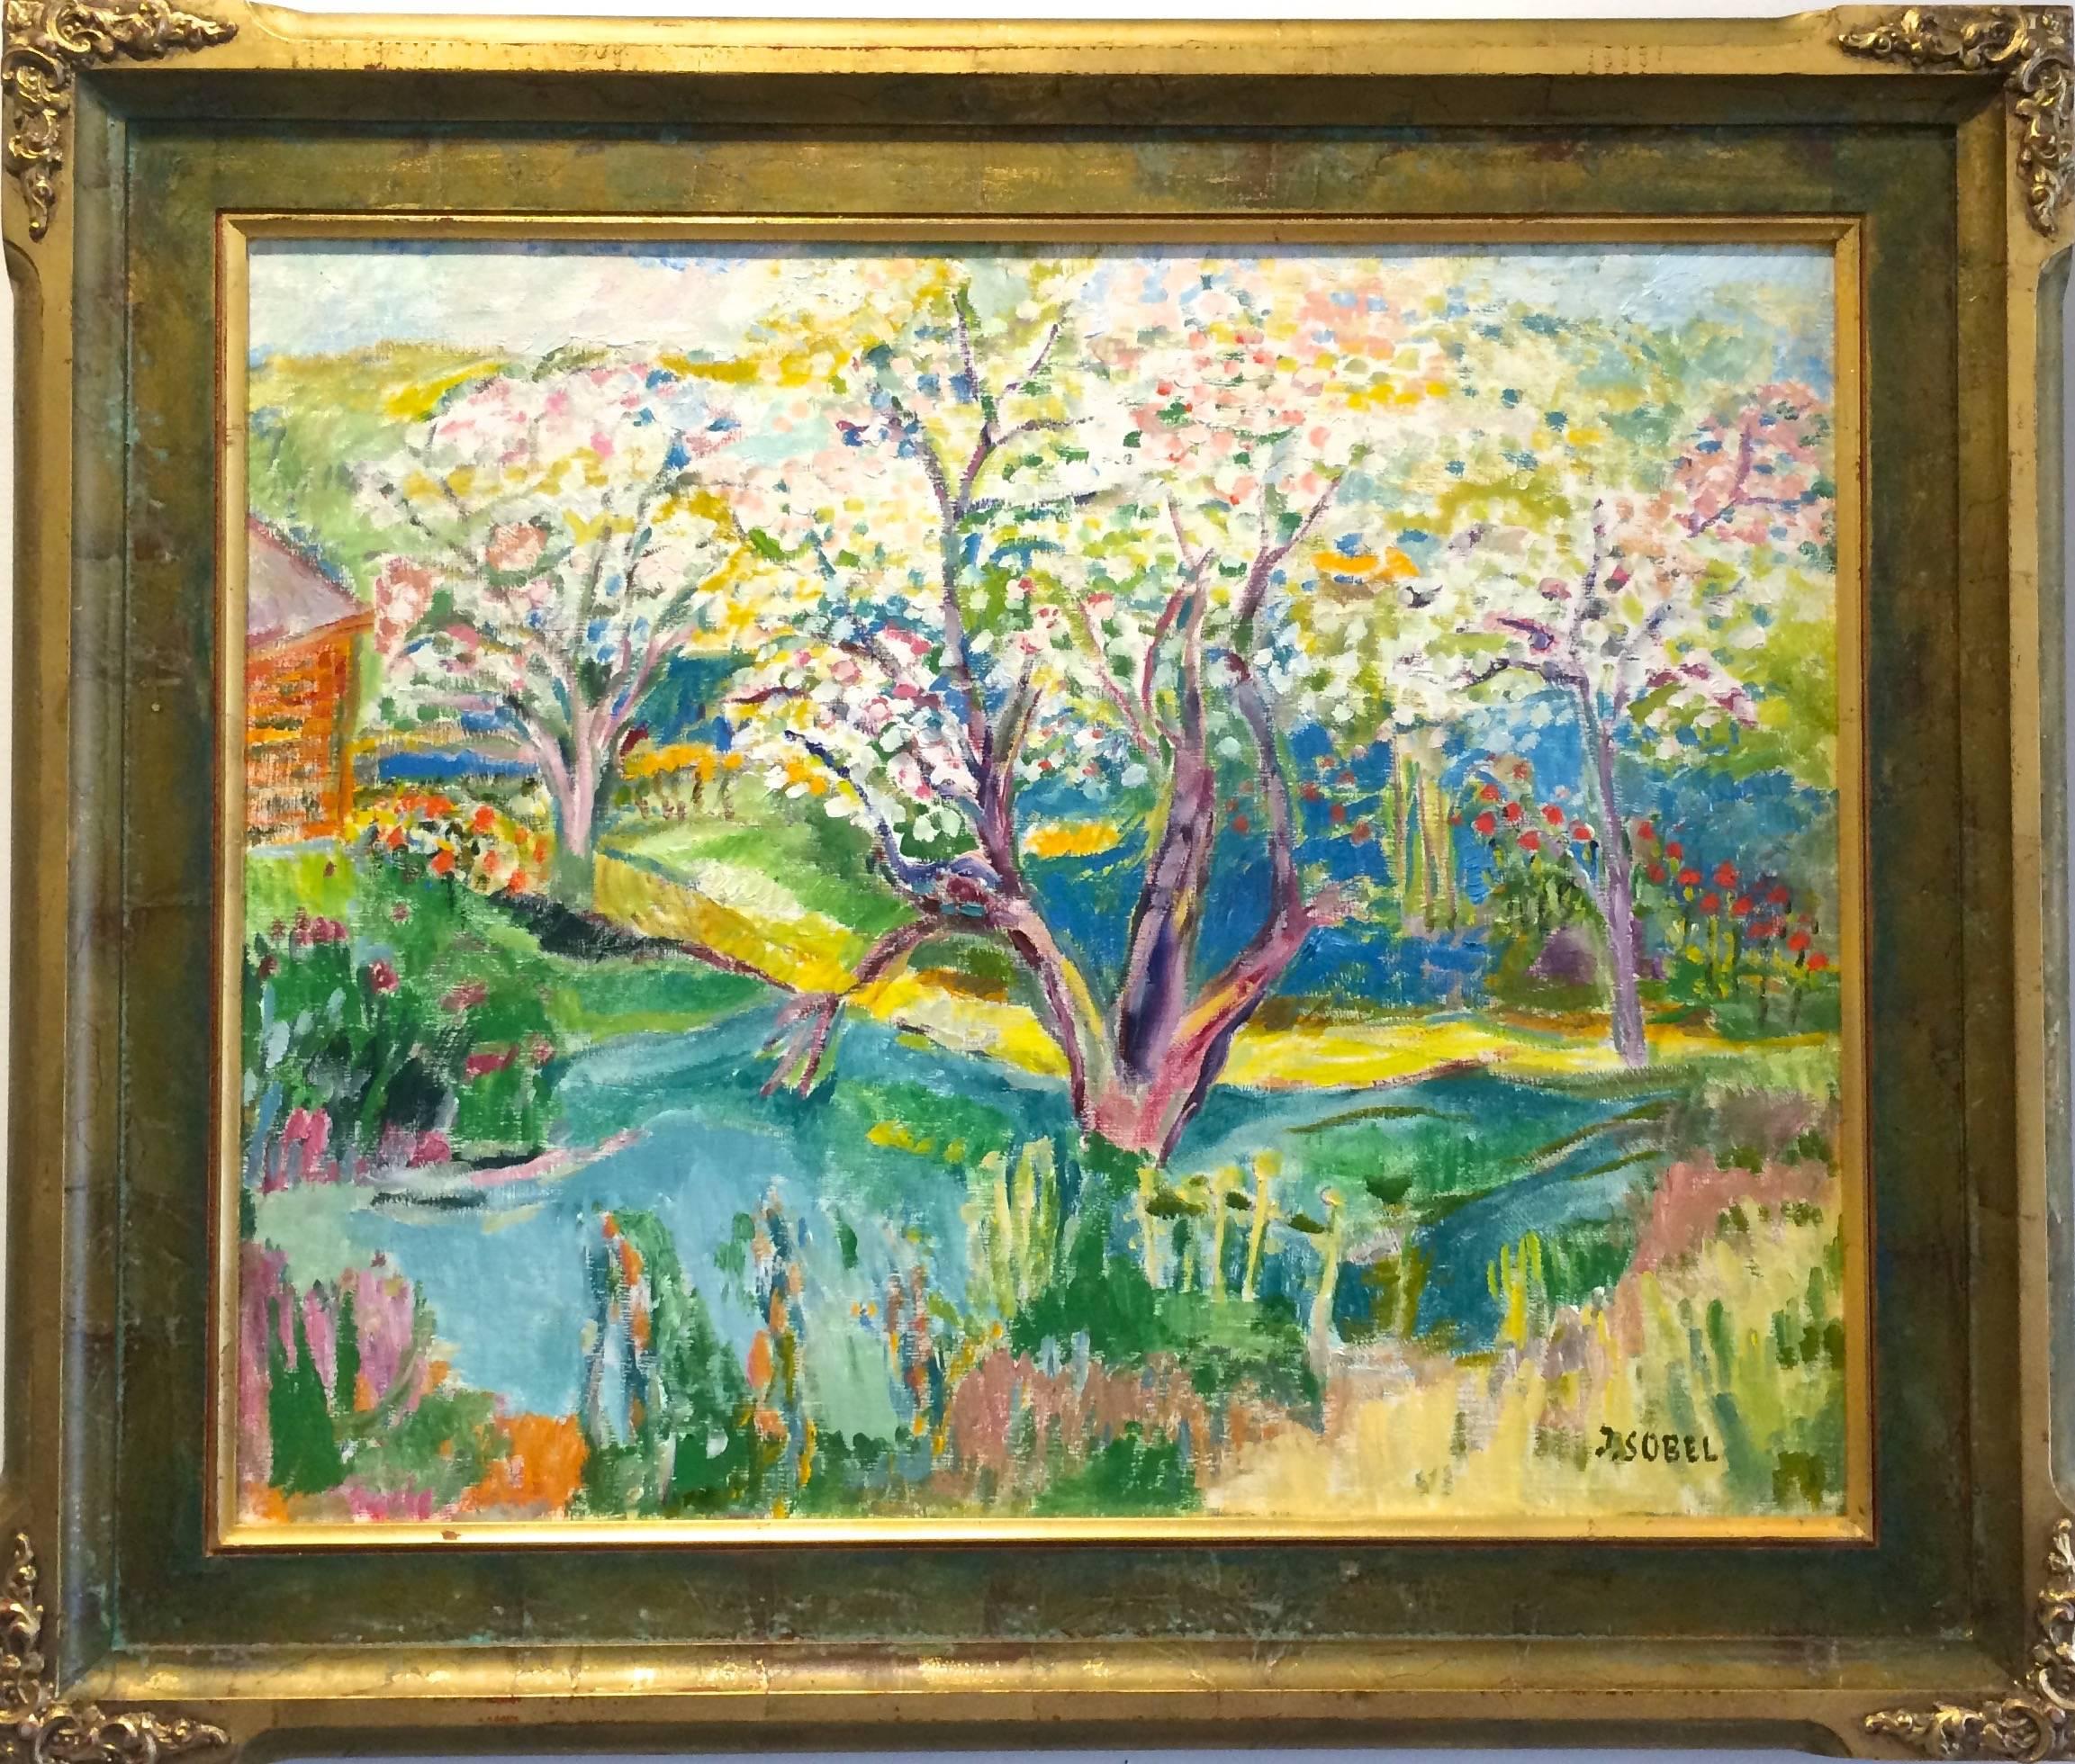 Jehudith Sobel Landscape Painting - Landscape with trees in bloom.